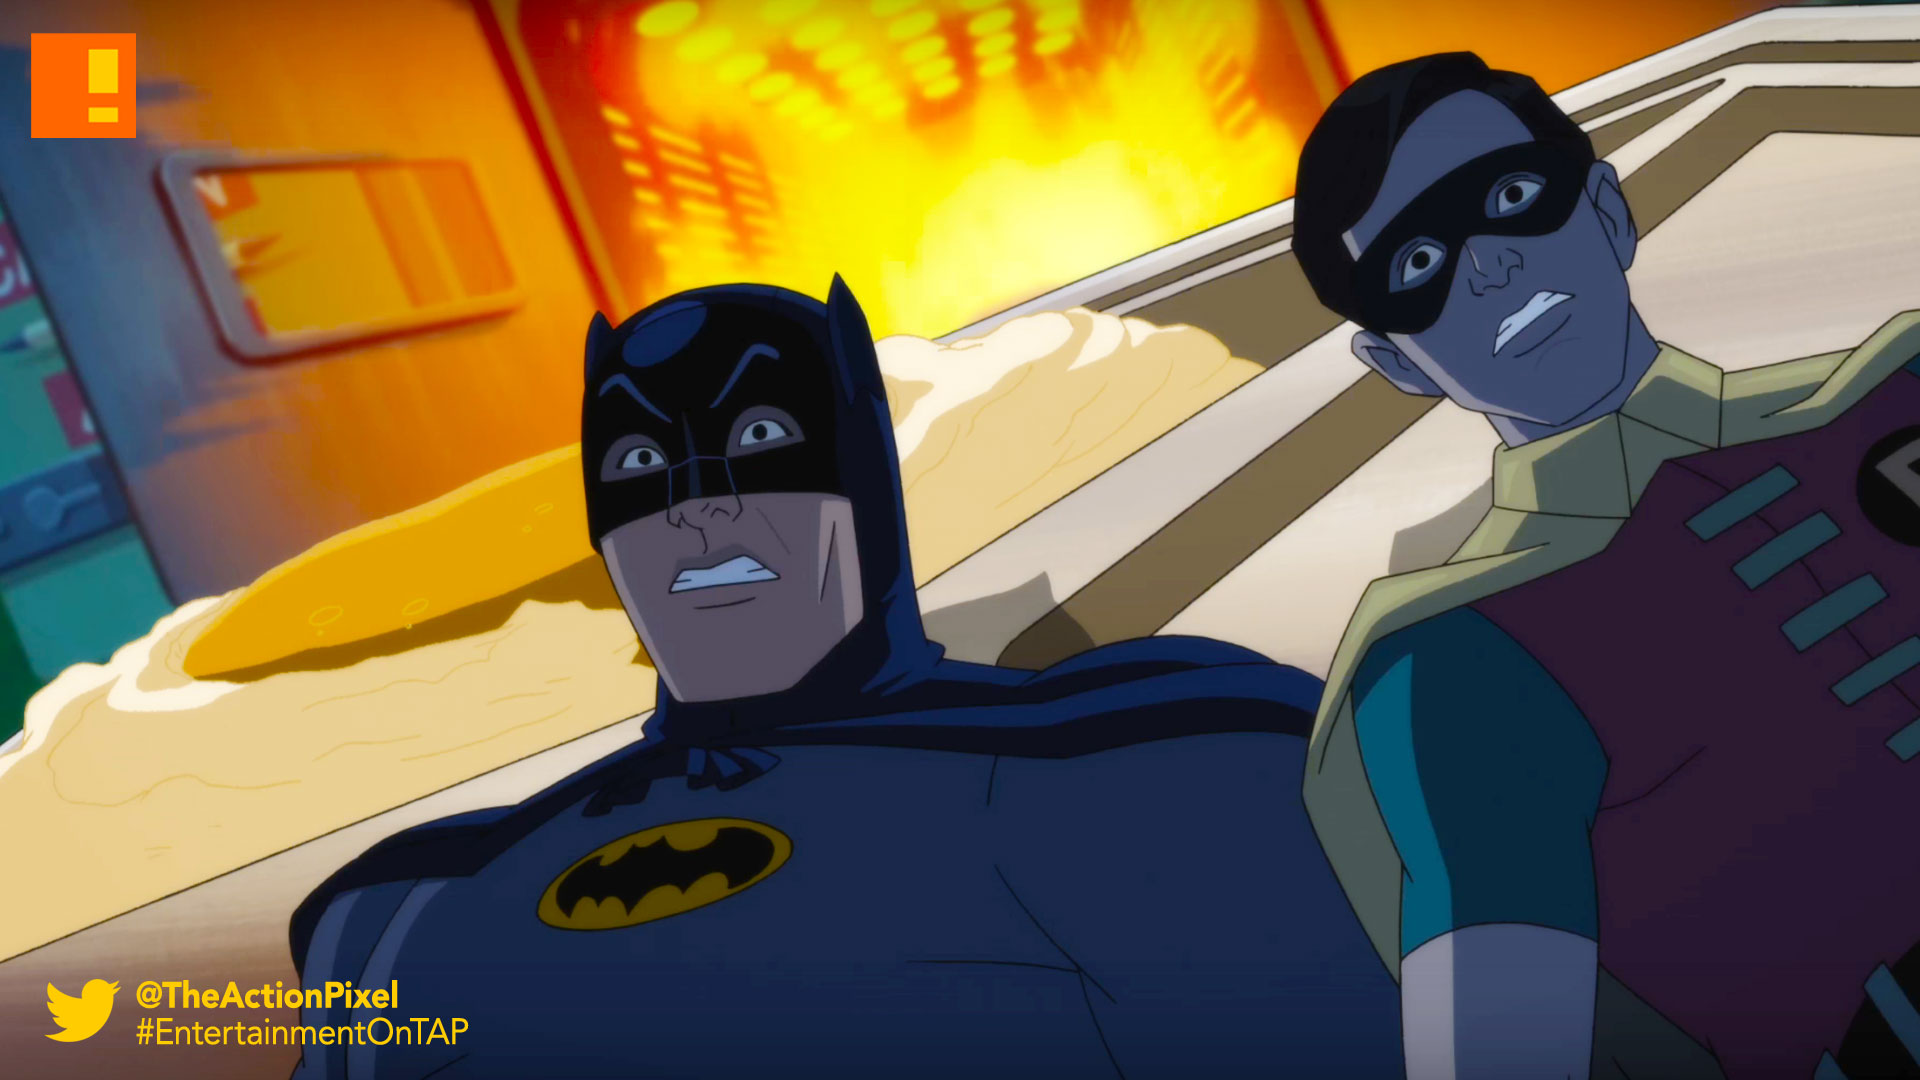 Batman: Return of the Caped Crusaders” Trailer released – The Action Pixel